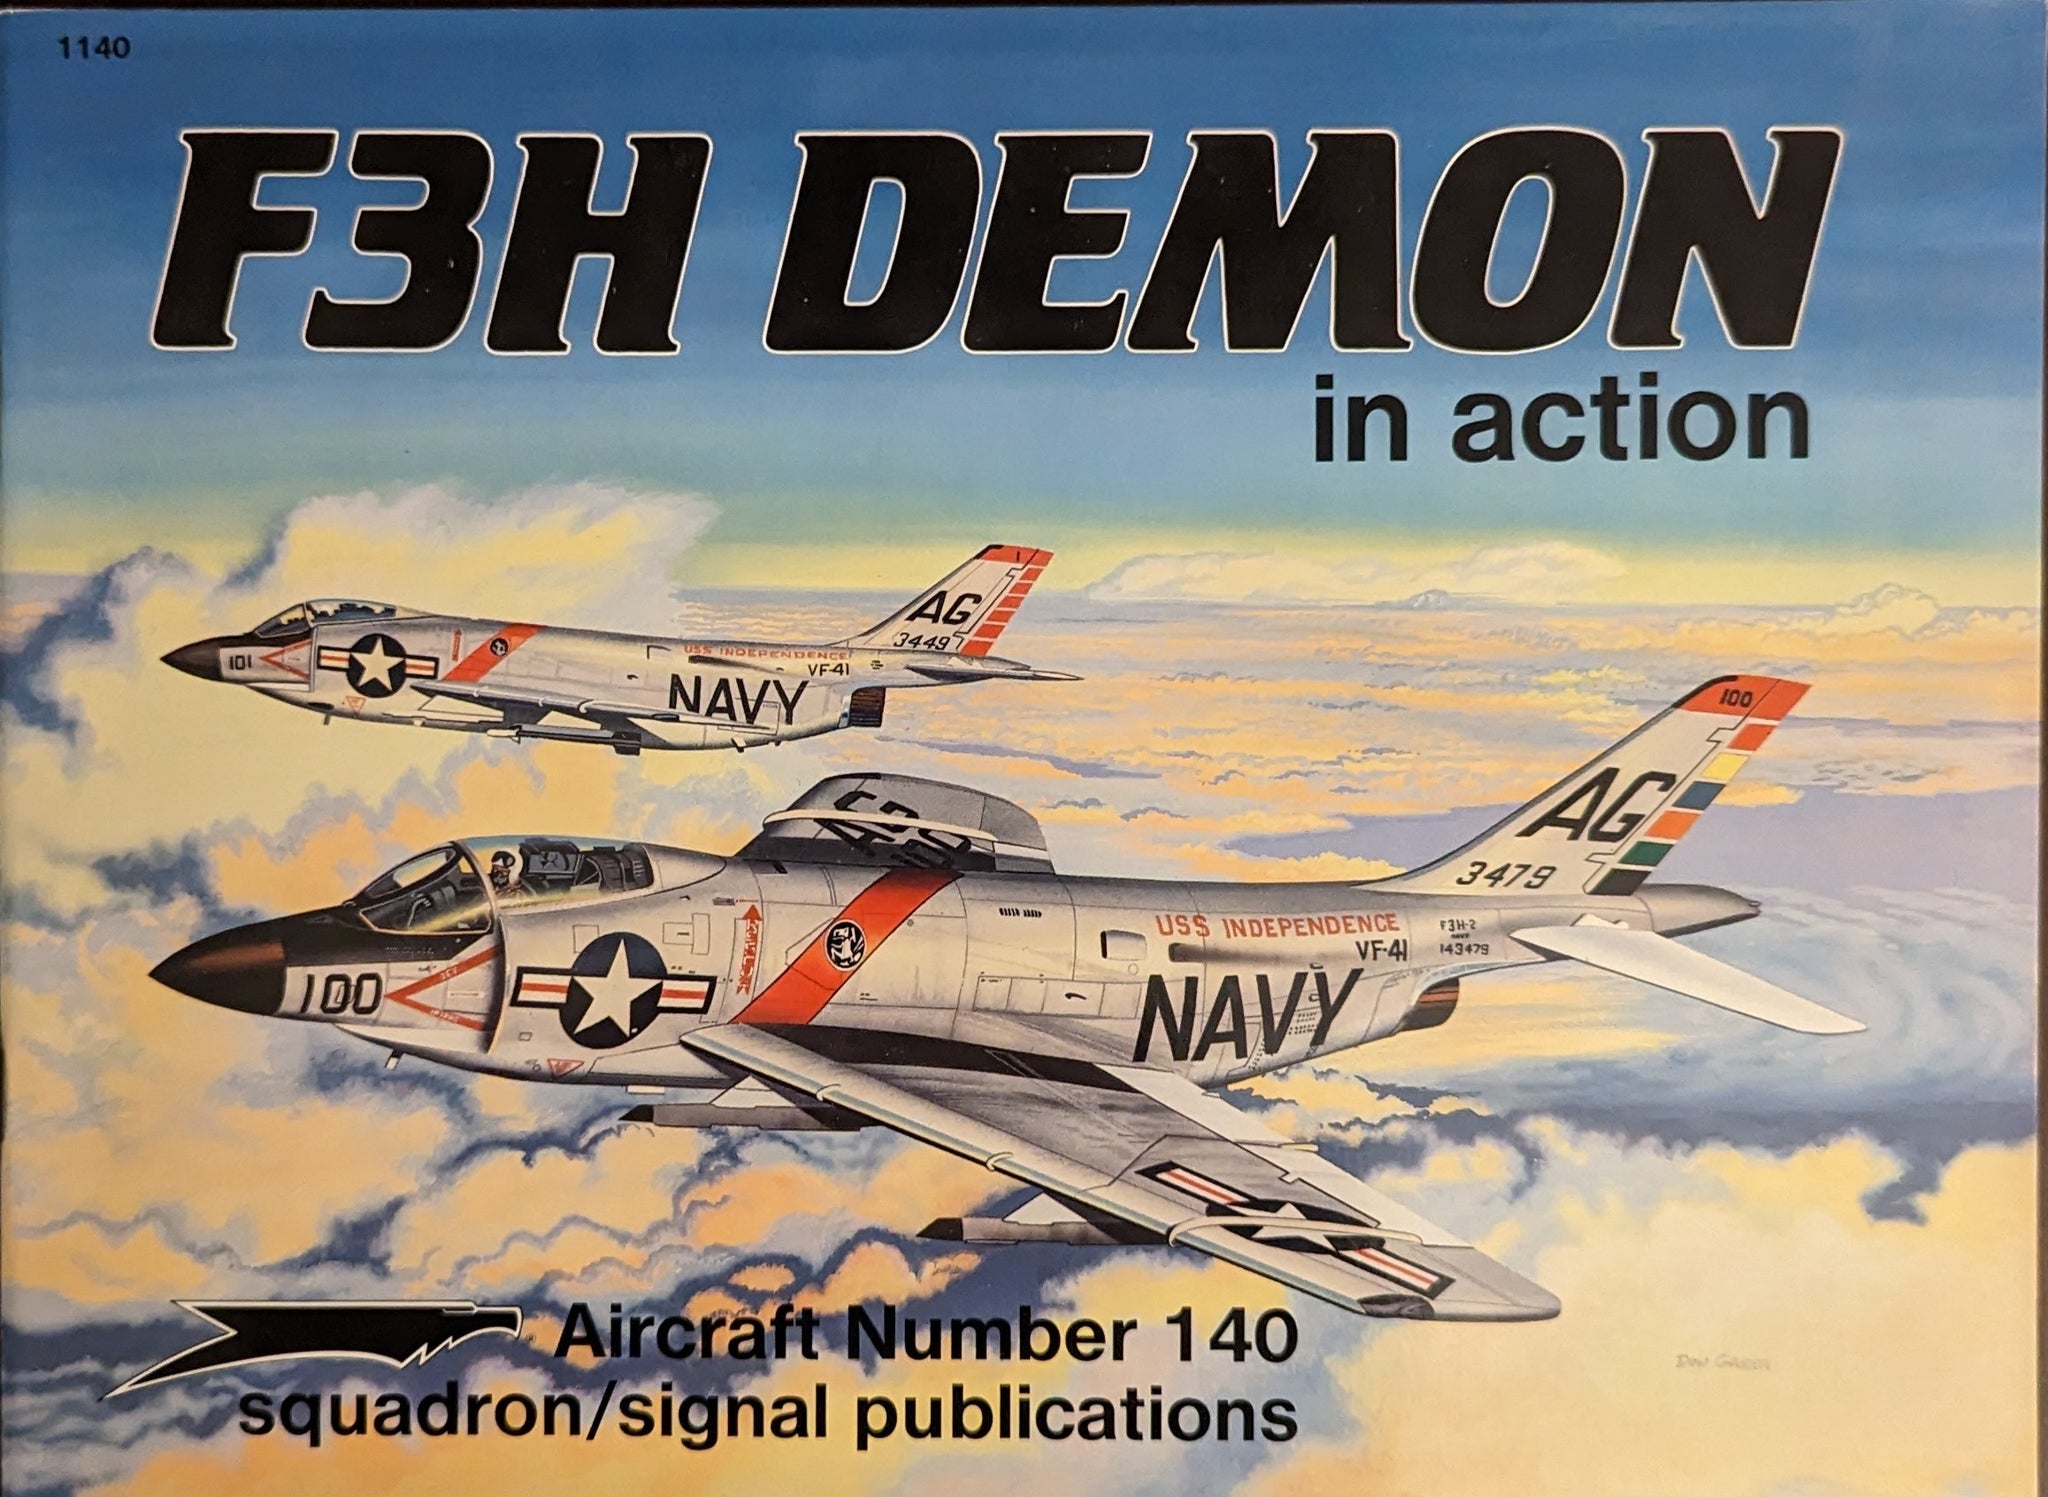 F3H DEMON in action